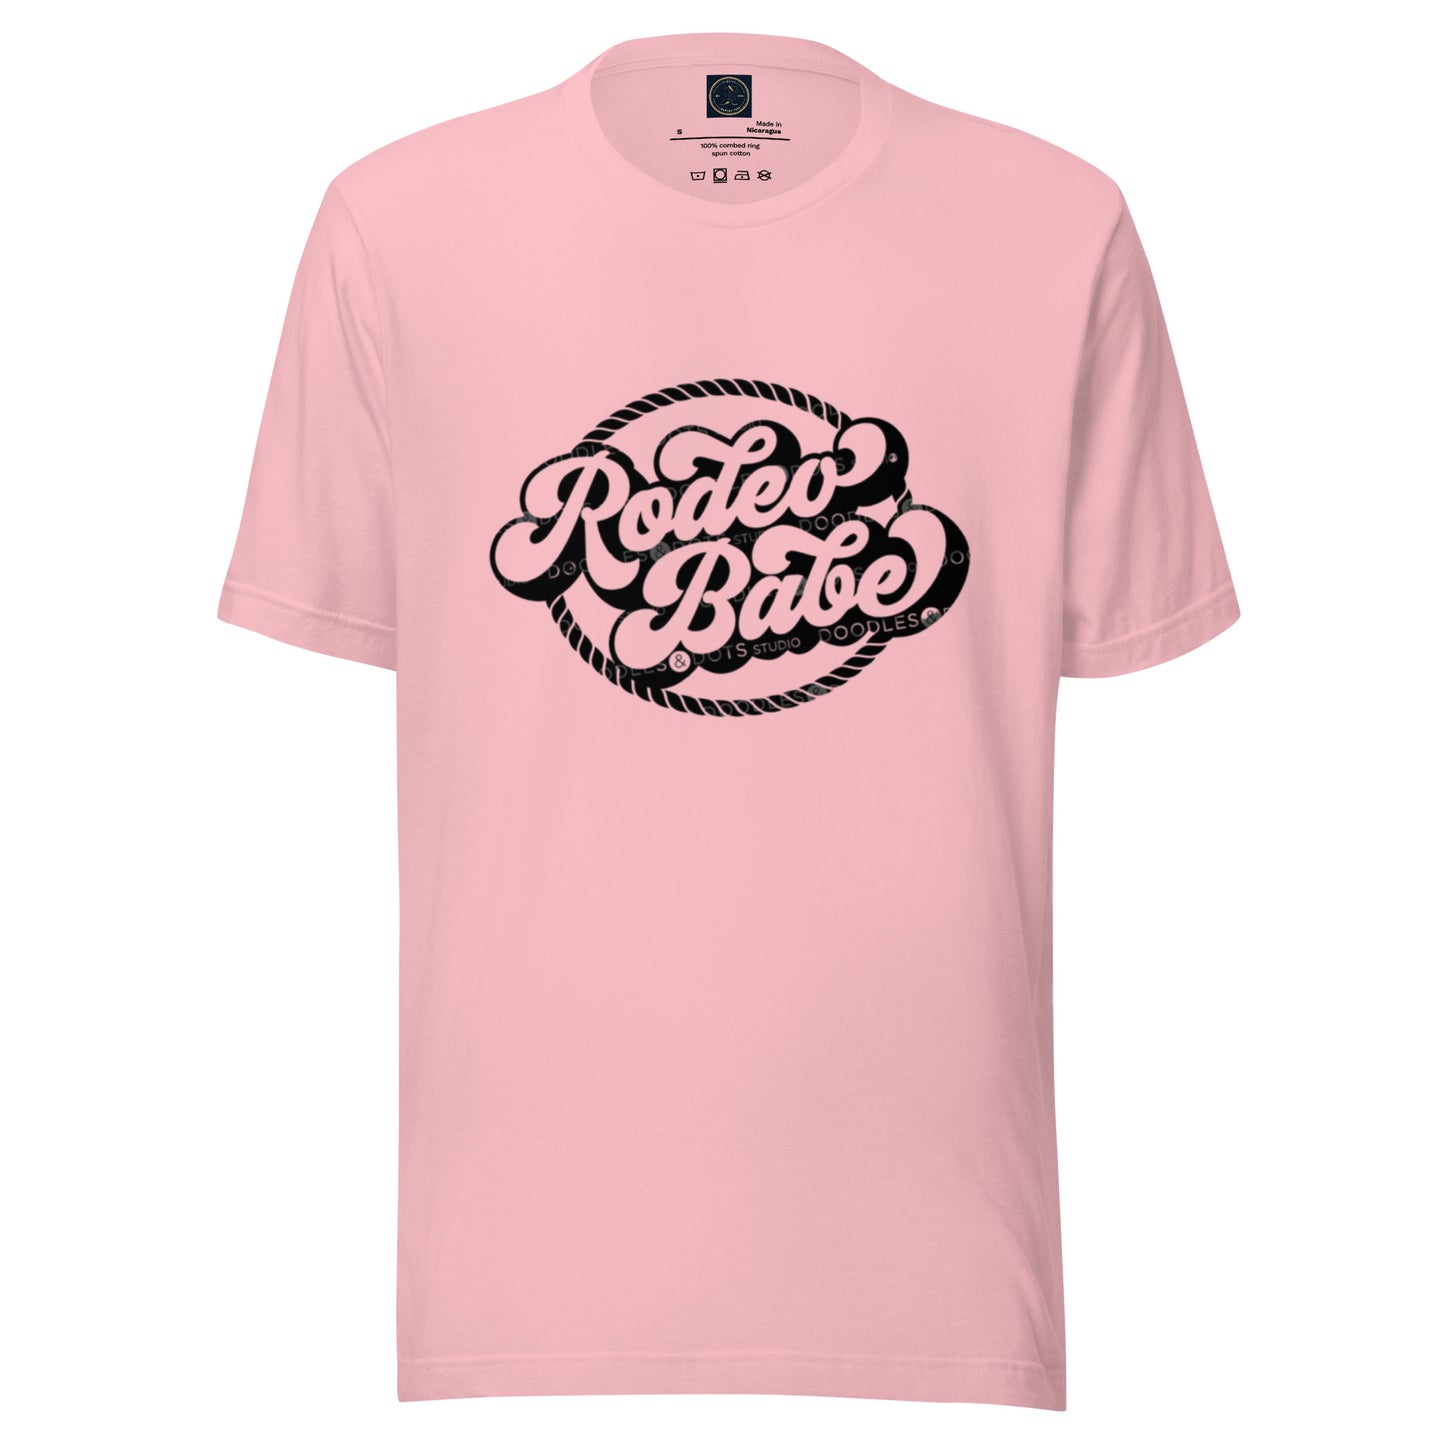 Rodeo Babe - Classic Country Tees